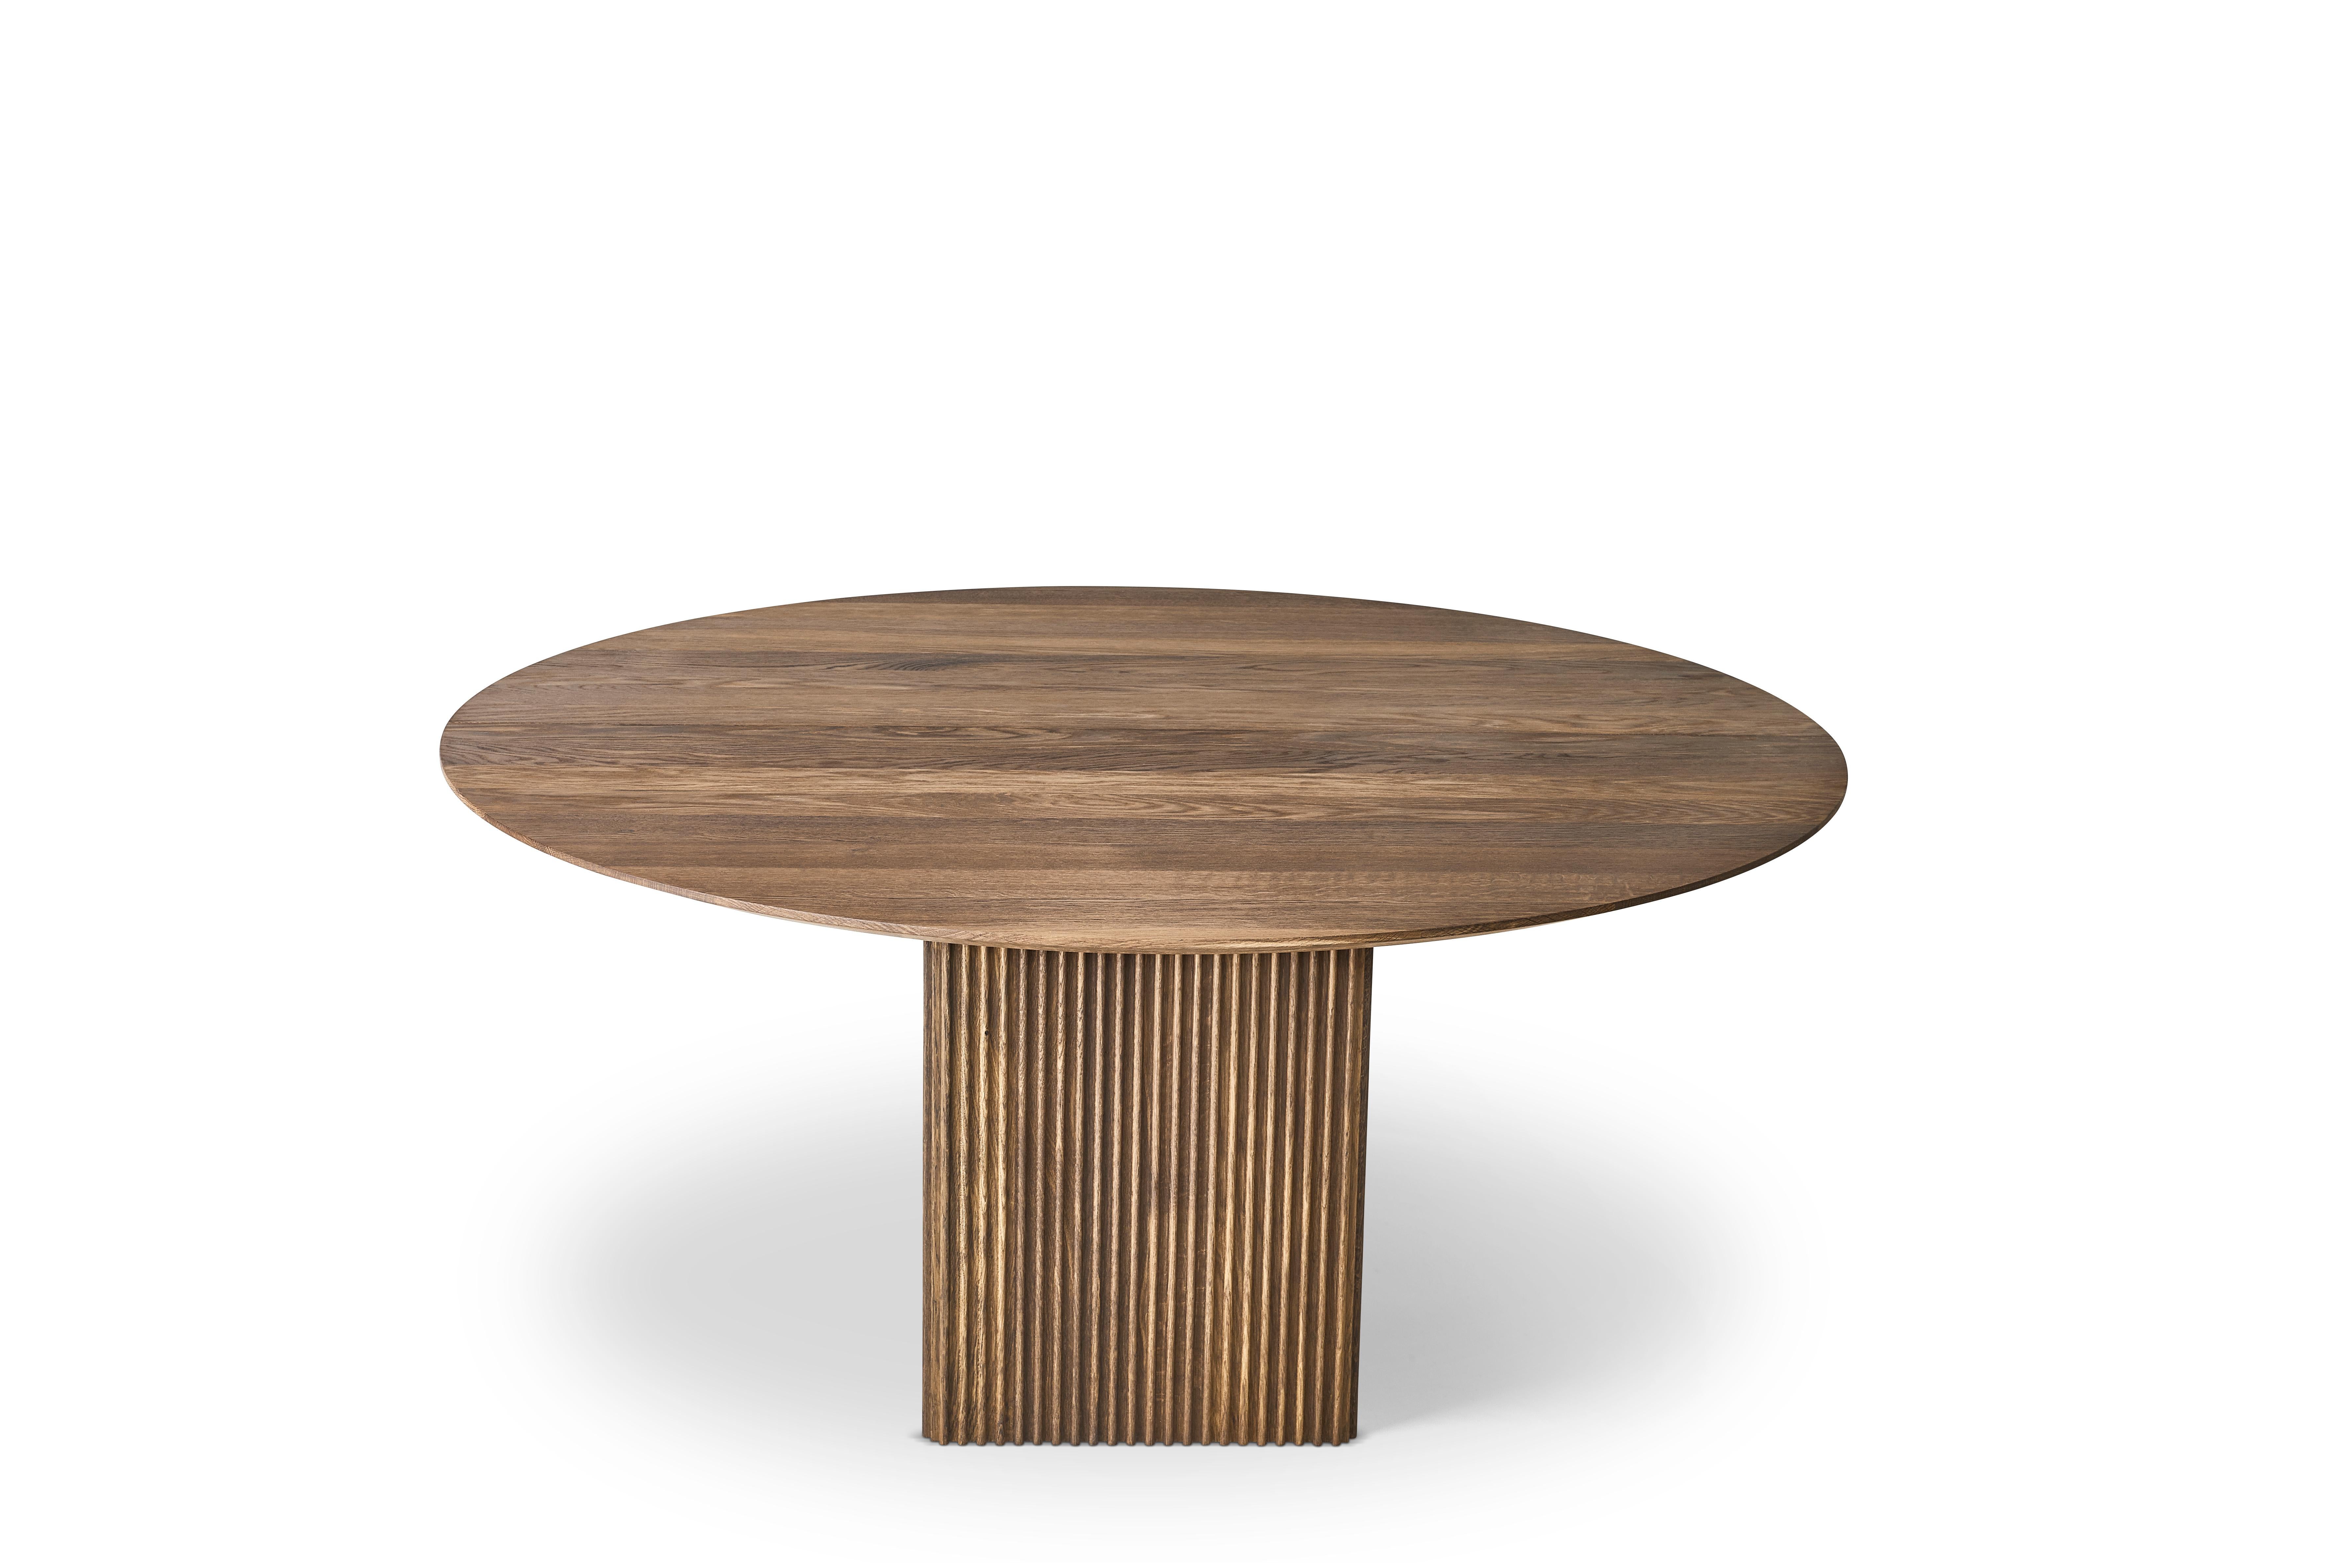 TEN Round Table 160 by DK3 
Solid wood tabletop and legs

Table height: 72 or 74 cm
Base dimension (depending on the tabletop size):
– 42 x 42 cm
– 47 x 47 cm

Tabletop diameter: 160 cm
Tabletop thickness: 3 cm

Wood :
– Oak
– Smoked